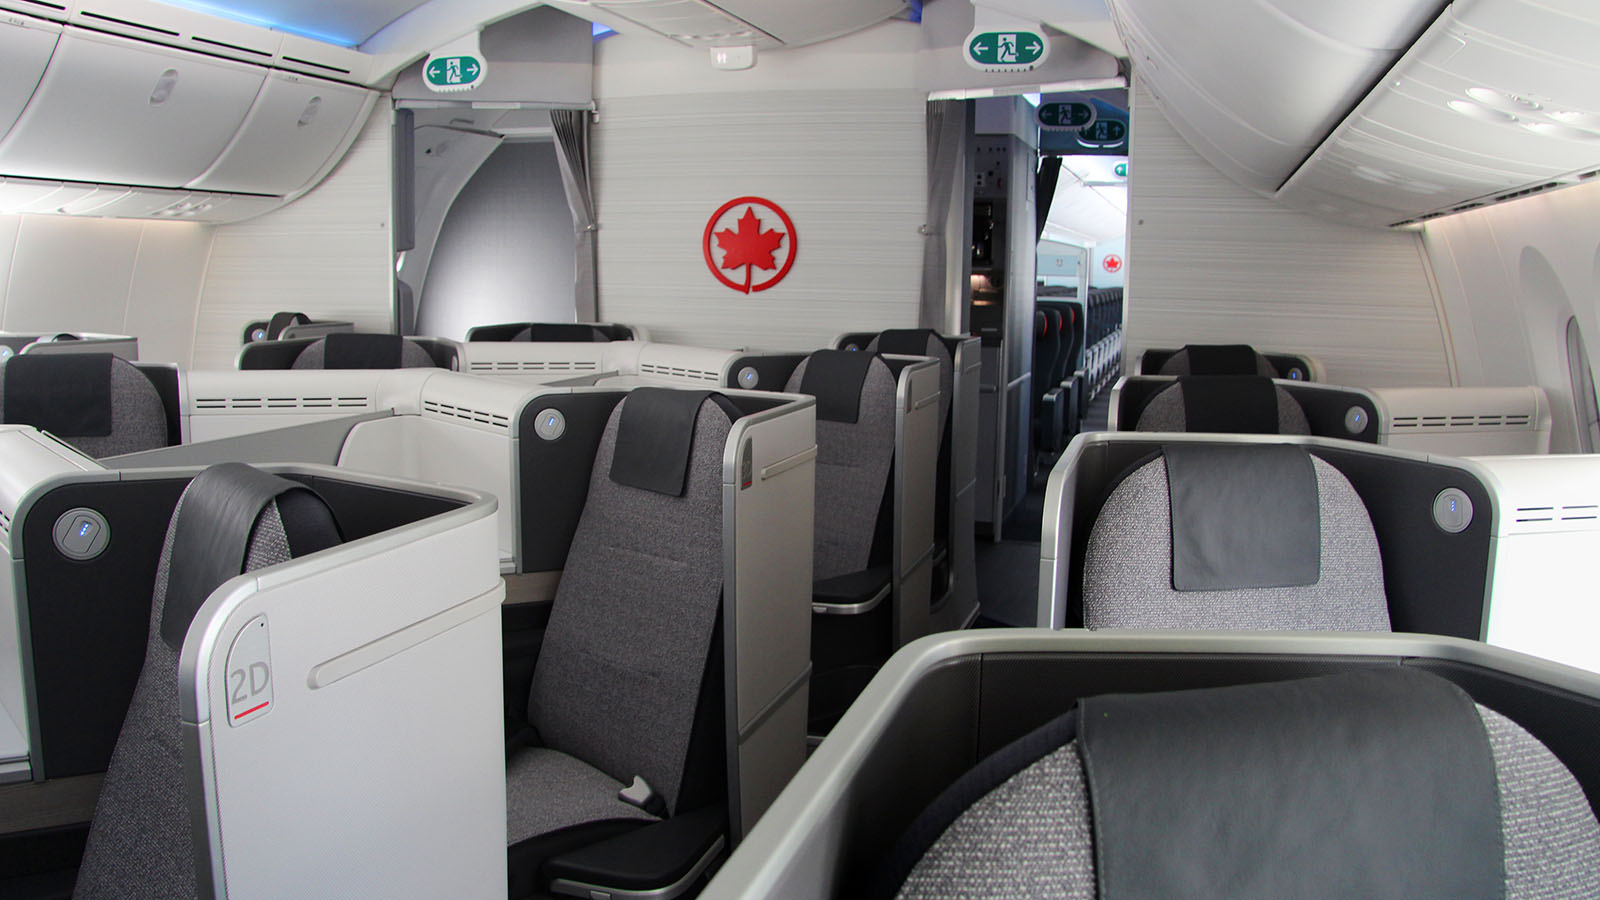 Seating in Air Canada Boeing 787 Signature Class